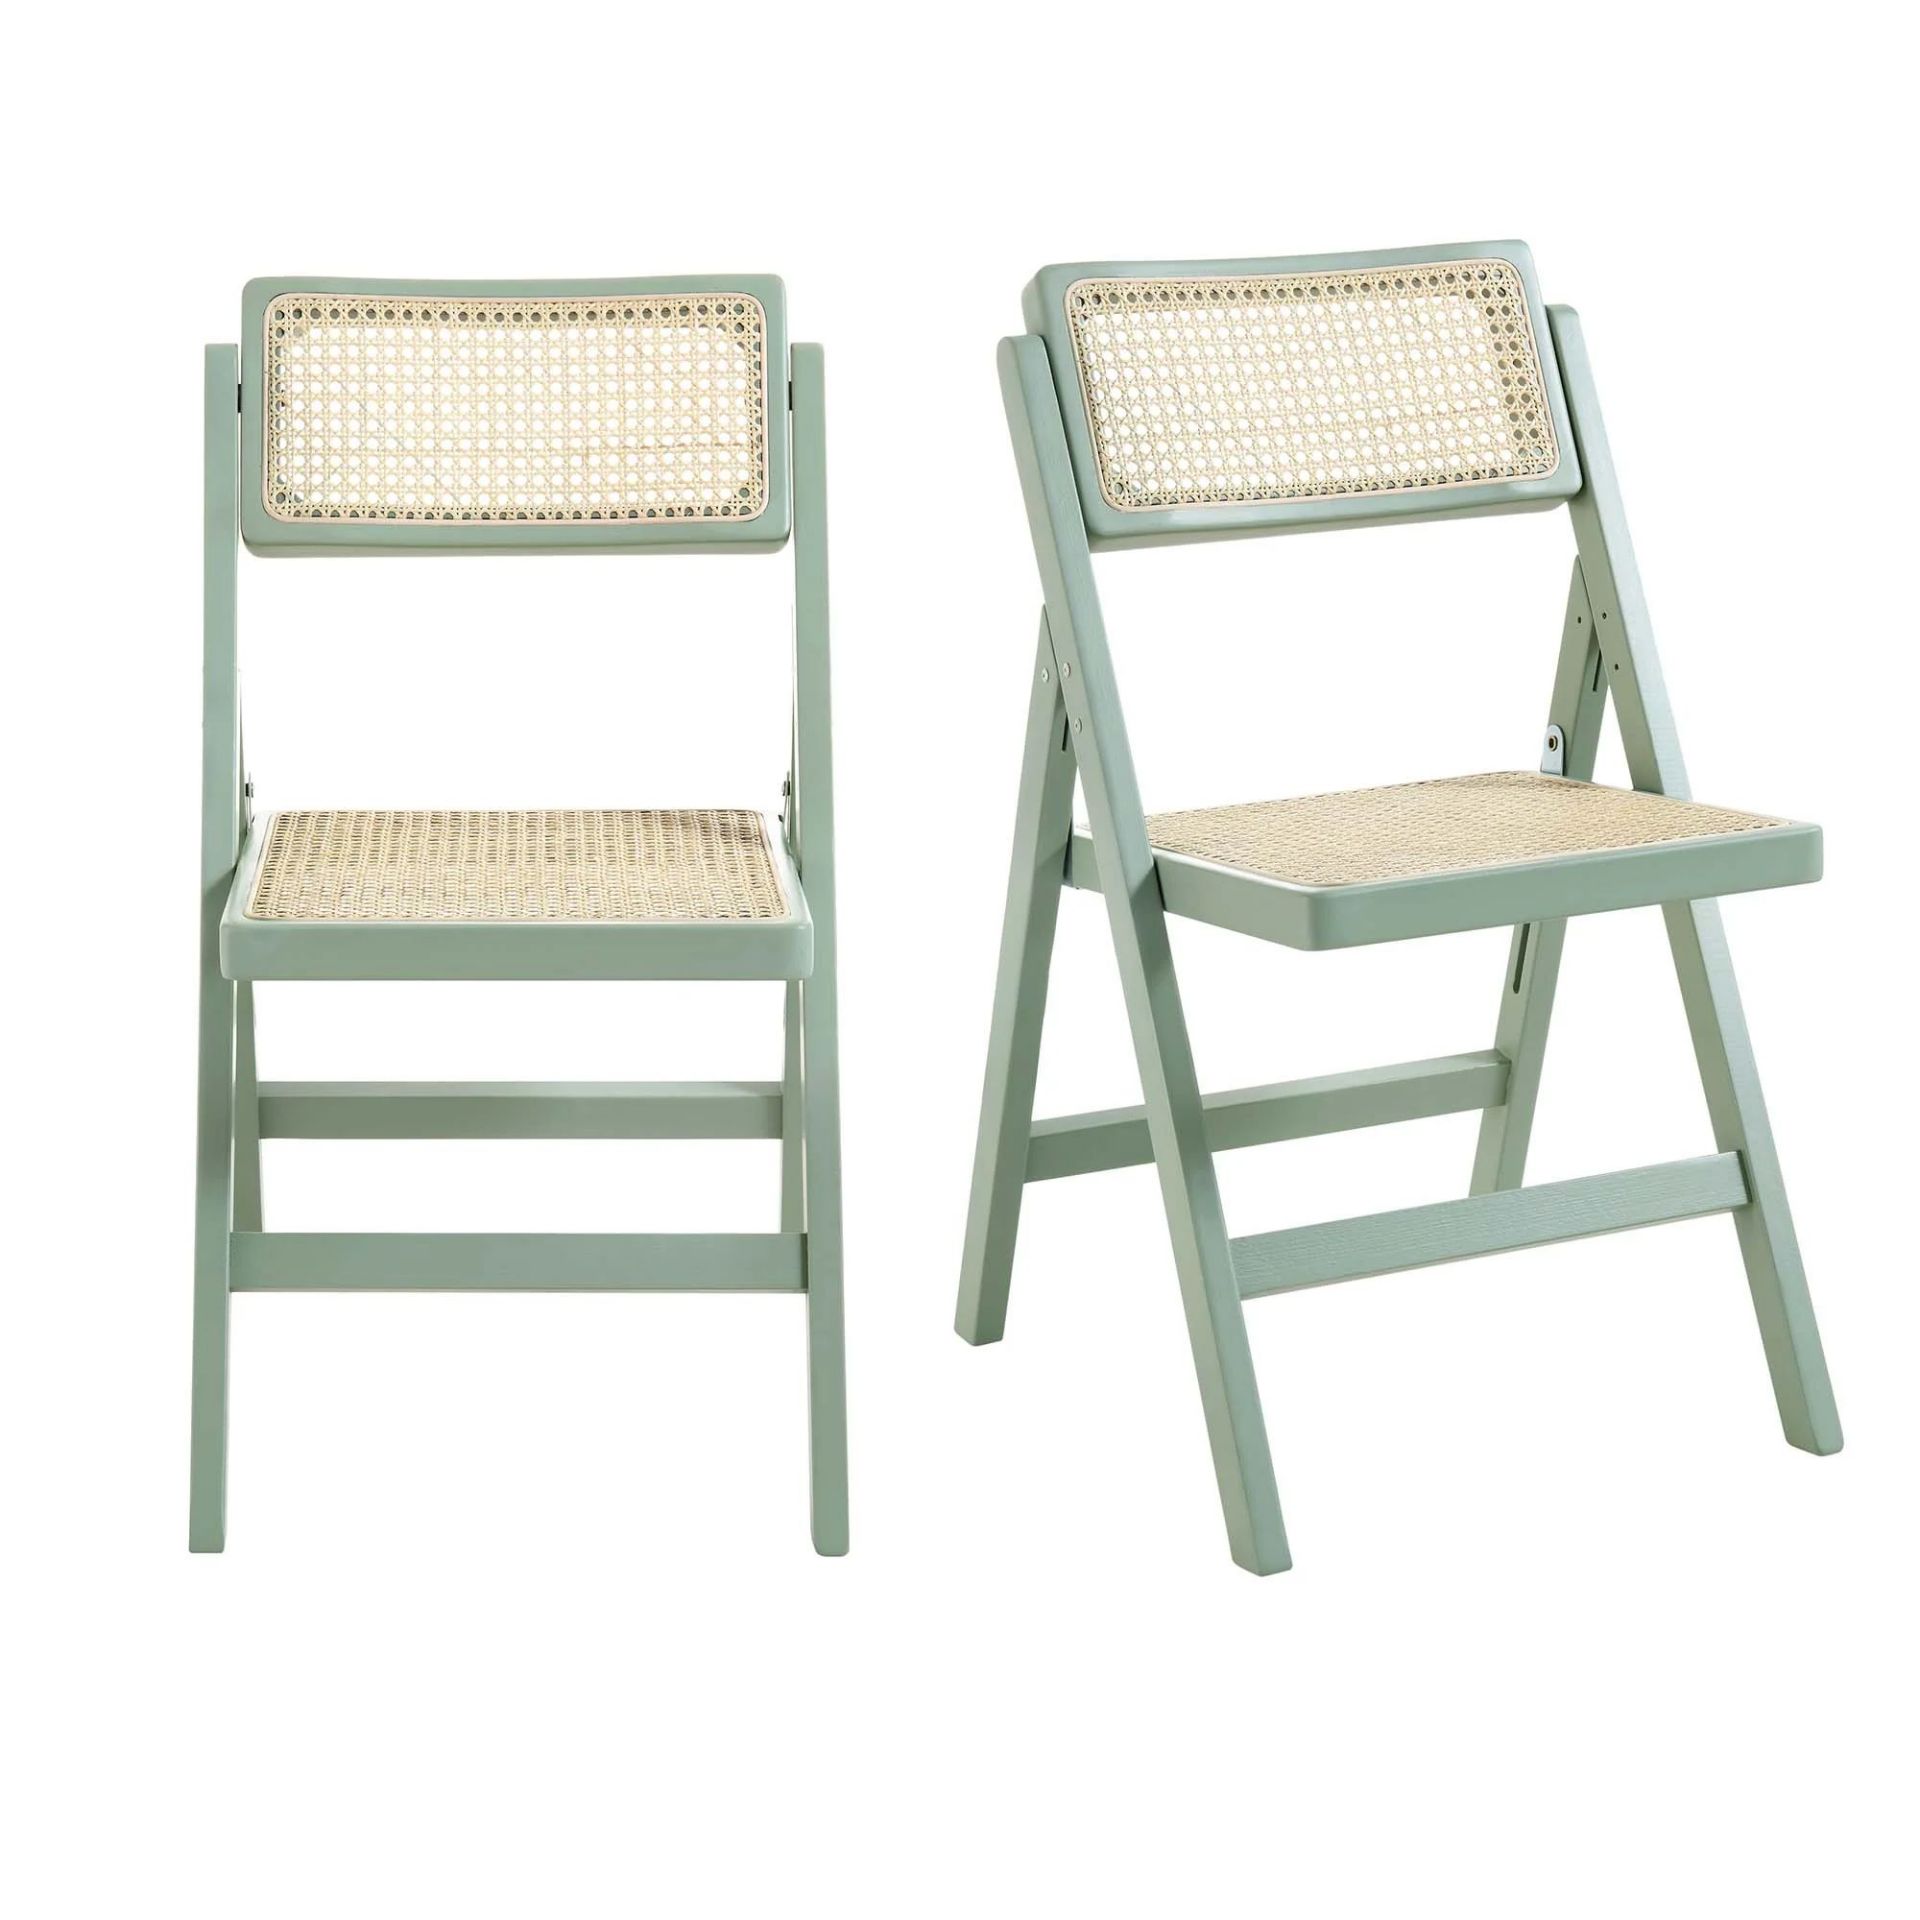 Frances Set of 2 Folding Cane Rattan Chairs, Mint. - ER31. RRP £249.99. With a solid beech wood - Bild 2 aus 2